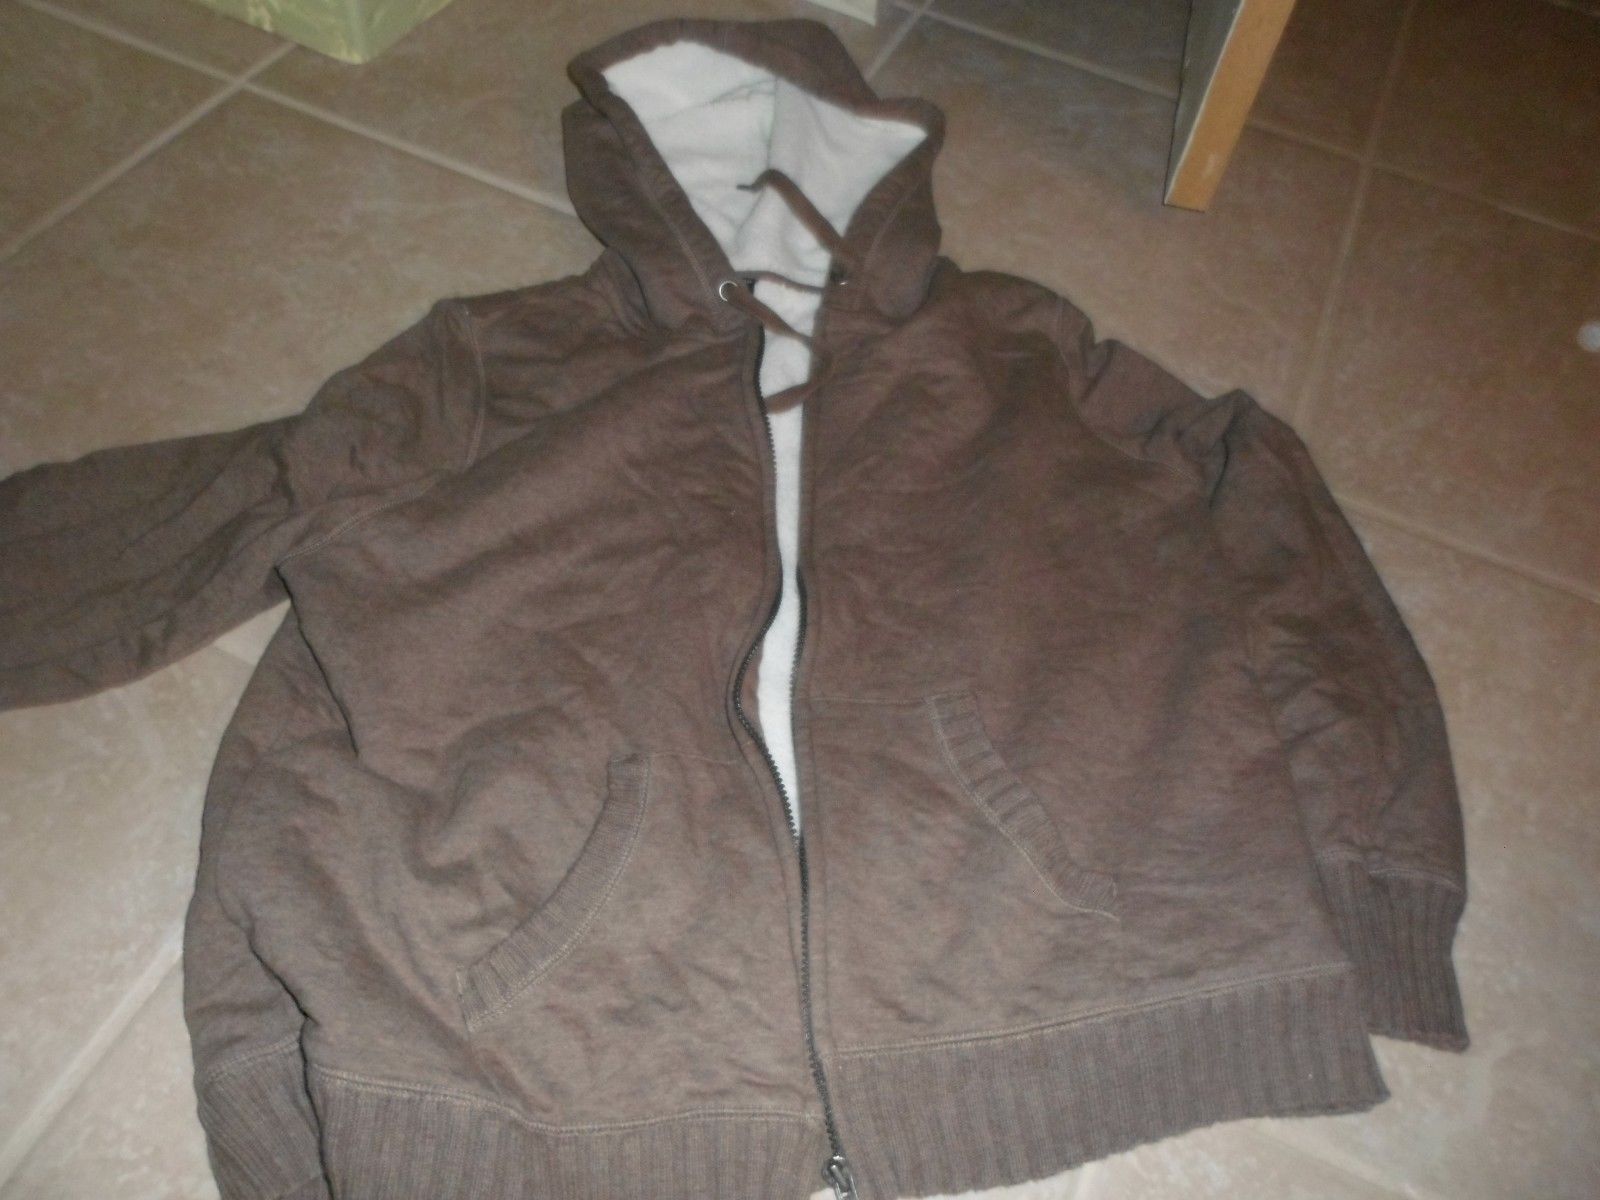 Faded Glory Hoodie: 1 customer review and 8 listings